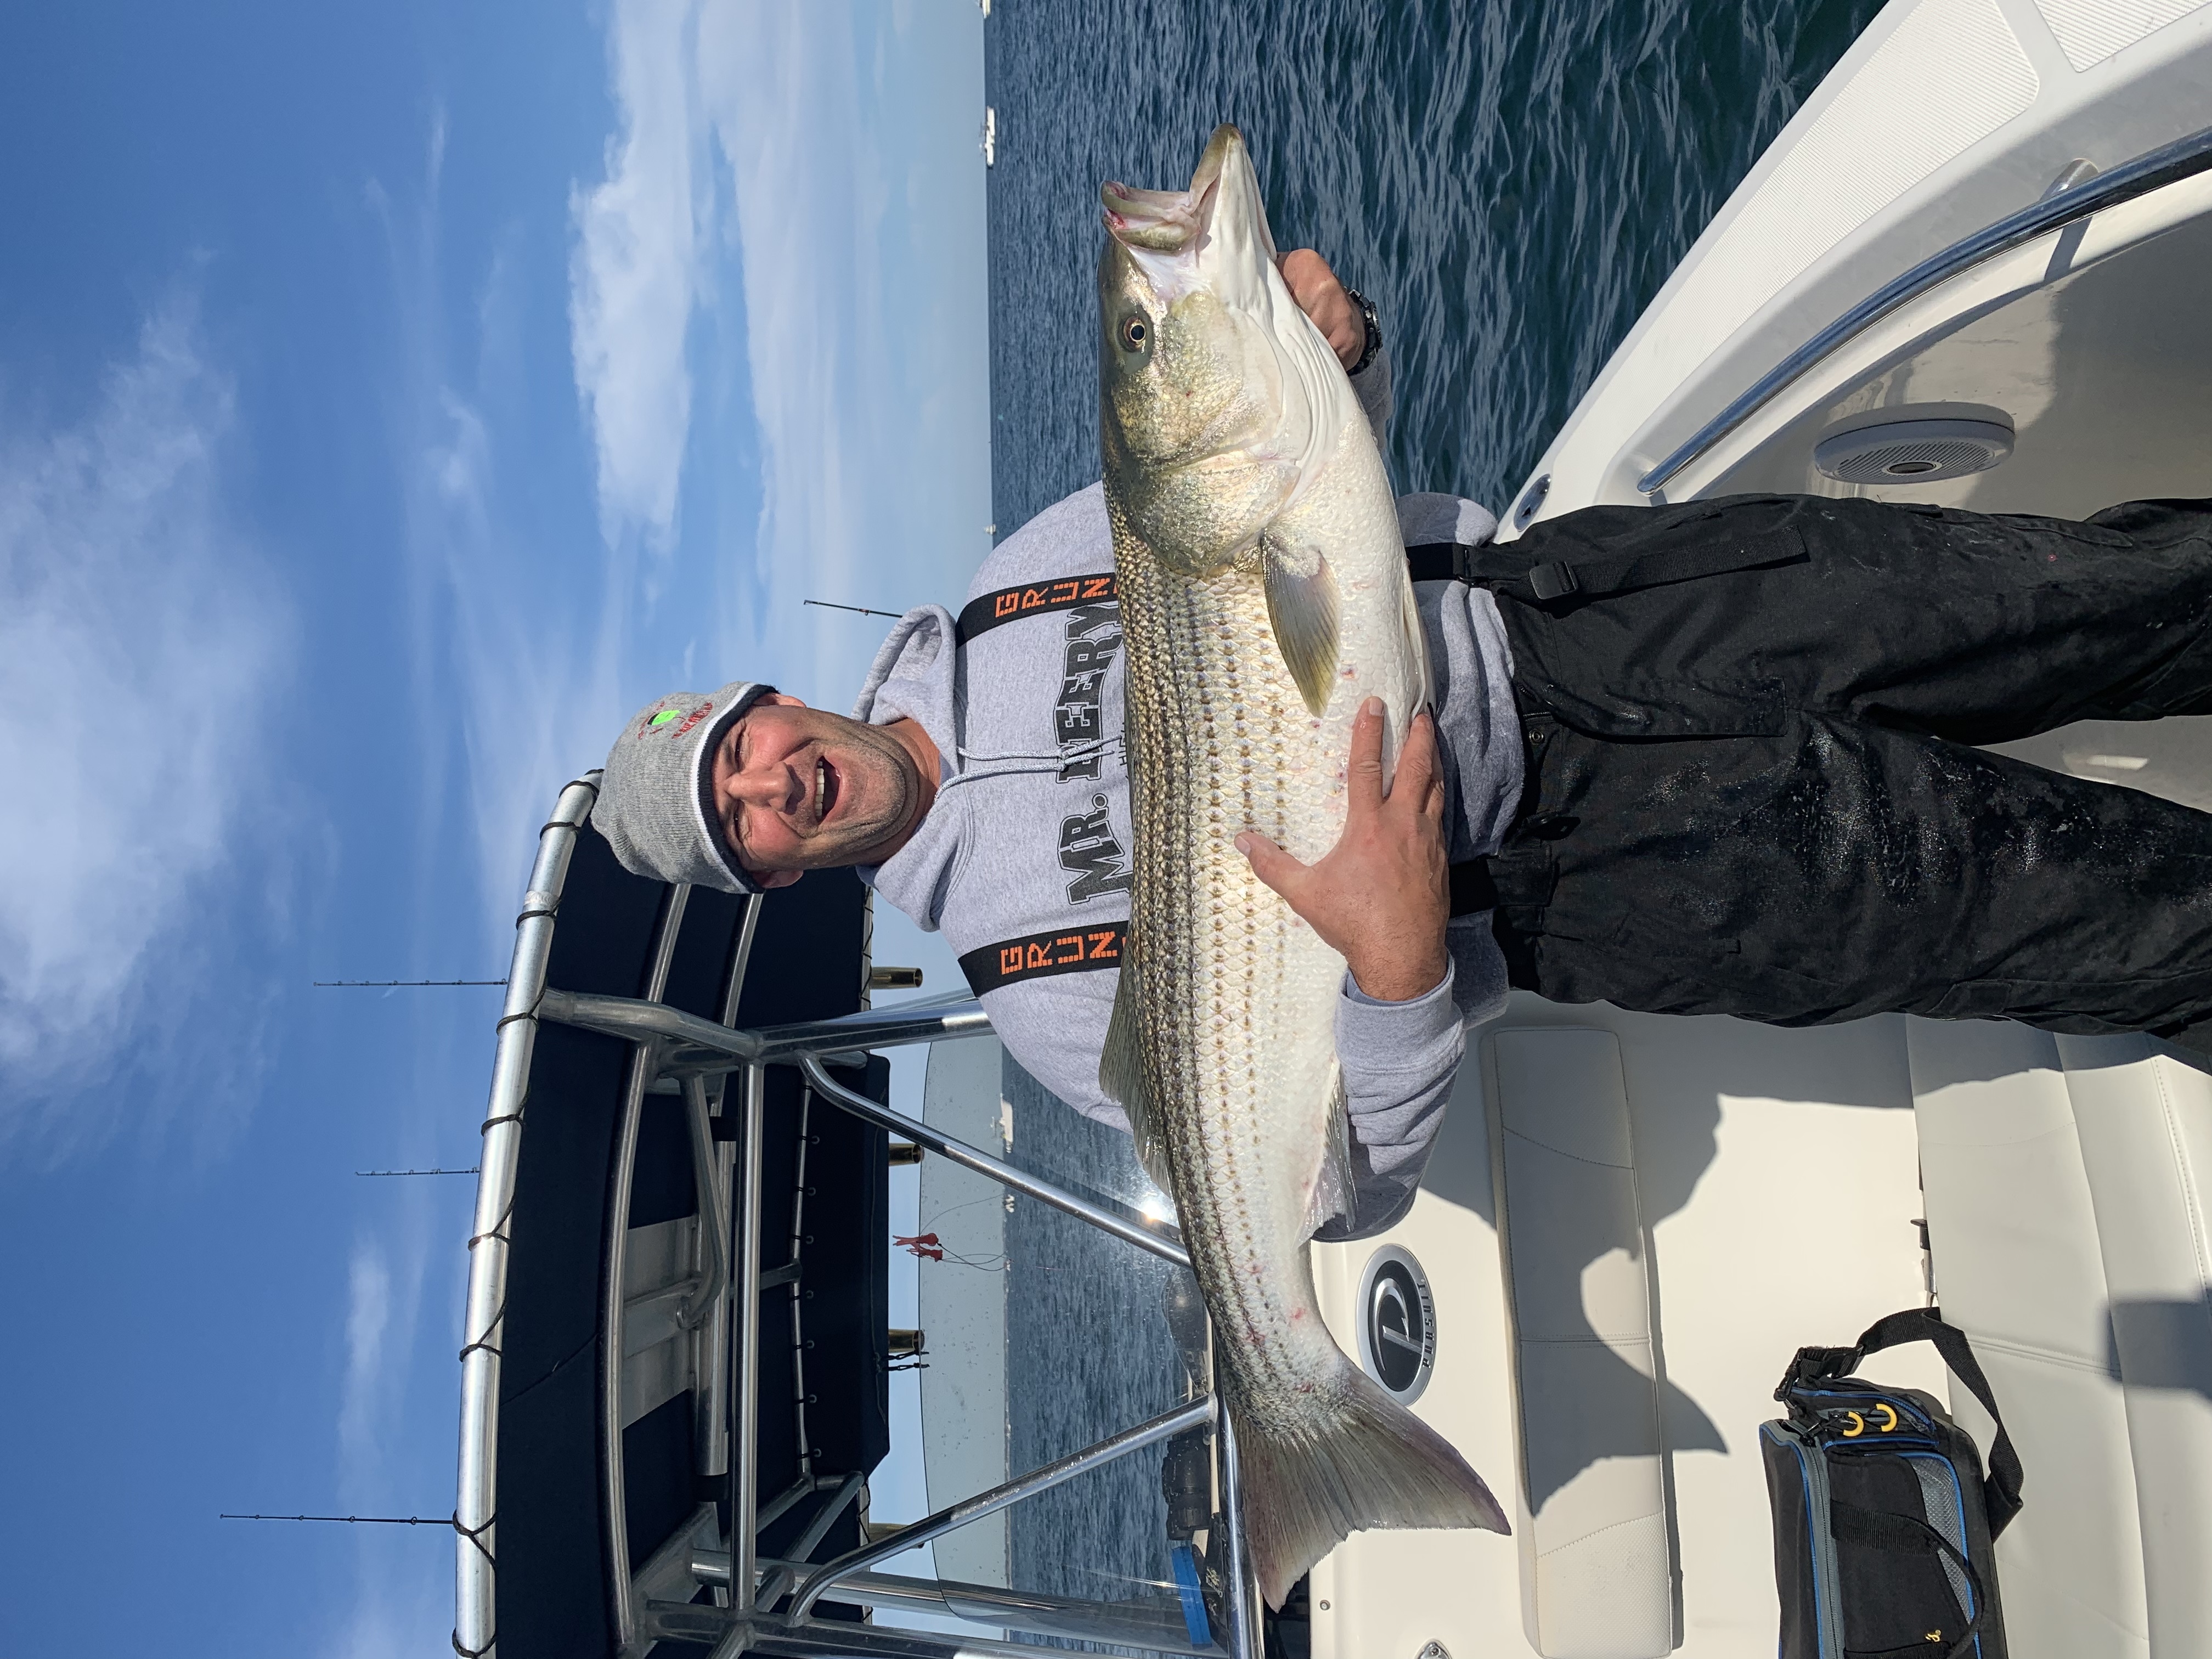 Chris Capalbo and a lot of anglers stumbled onto red hot fishing for big striped bass outside Shinnecock Inlet over the weekend.